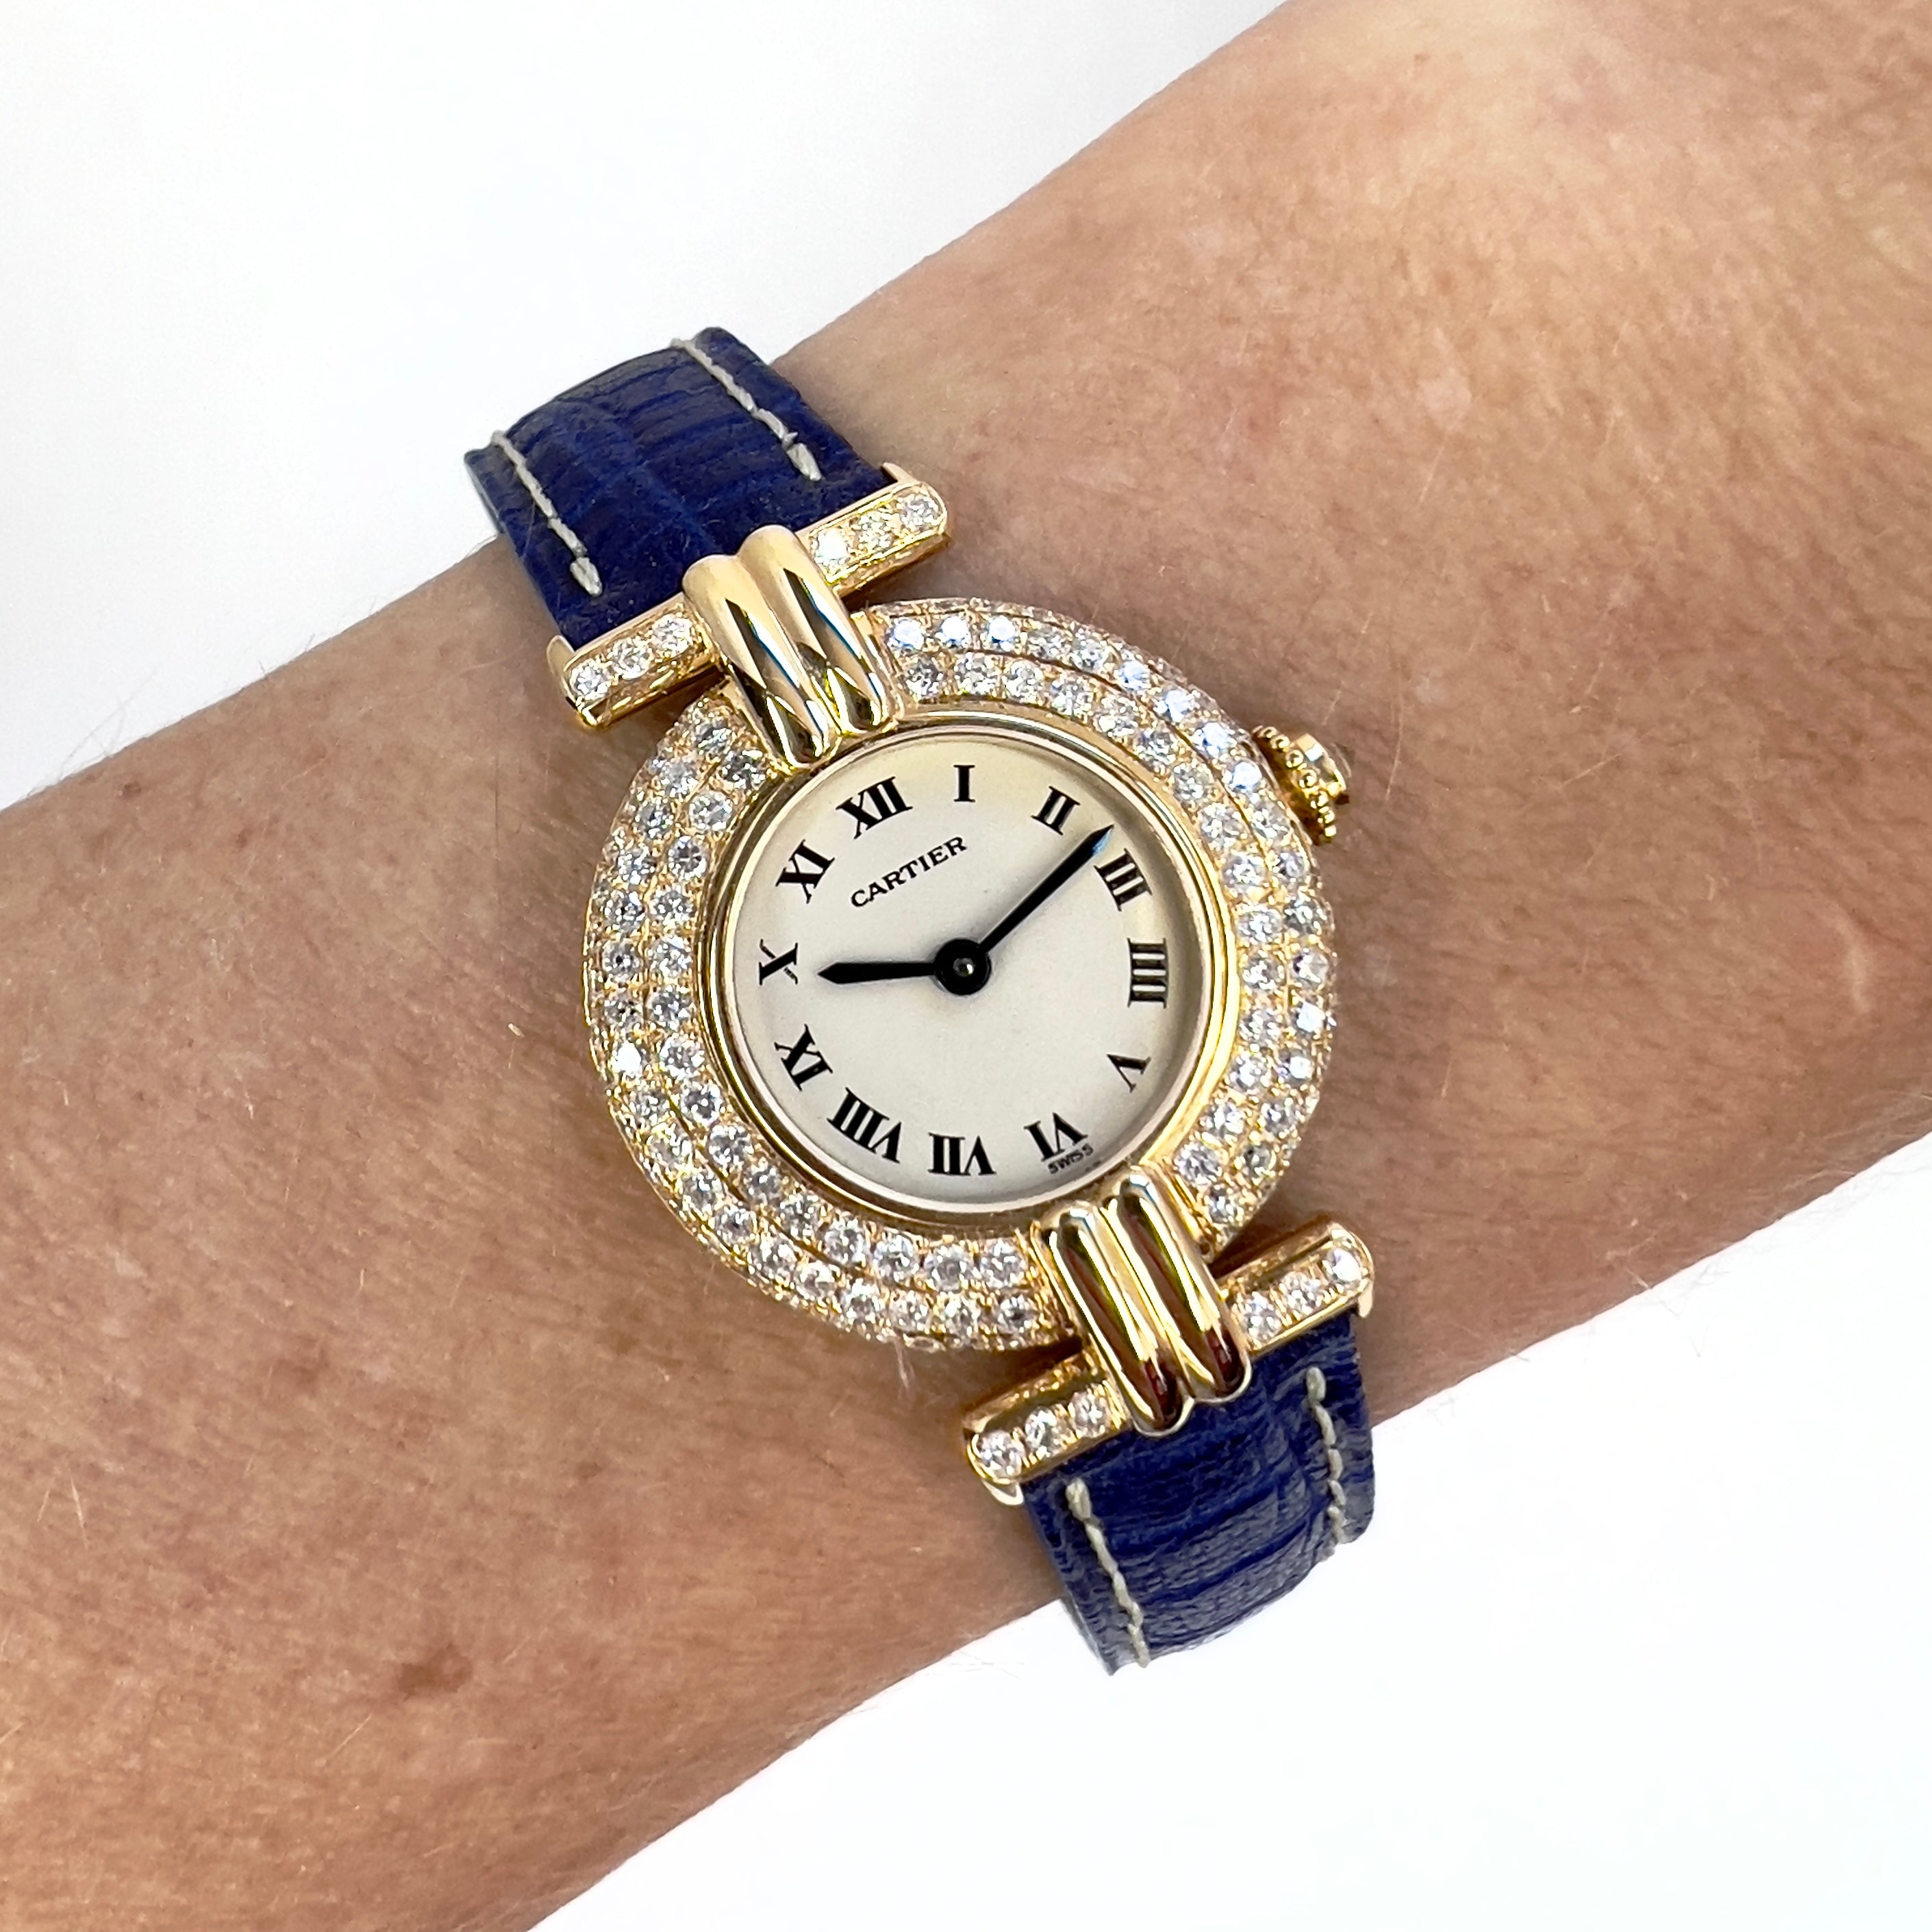 Cartier Colisee - Maunder Watch Co.